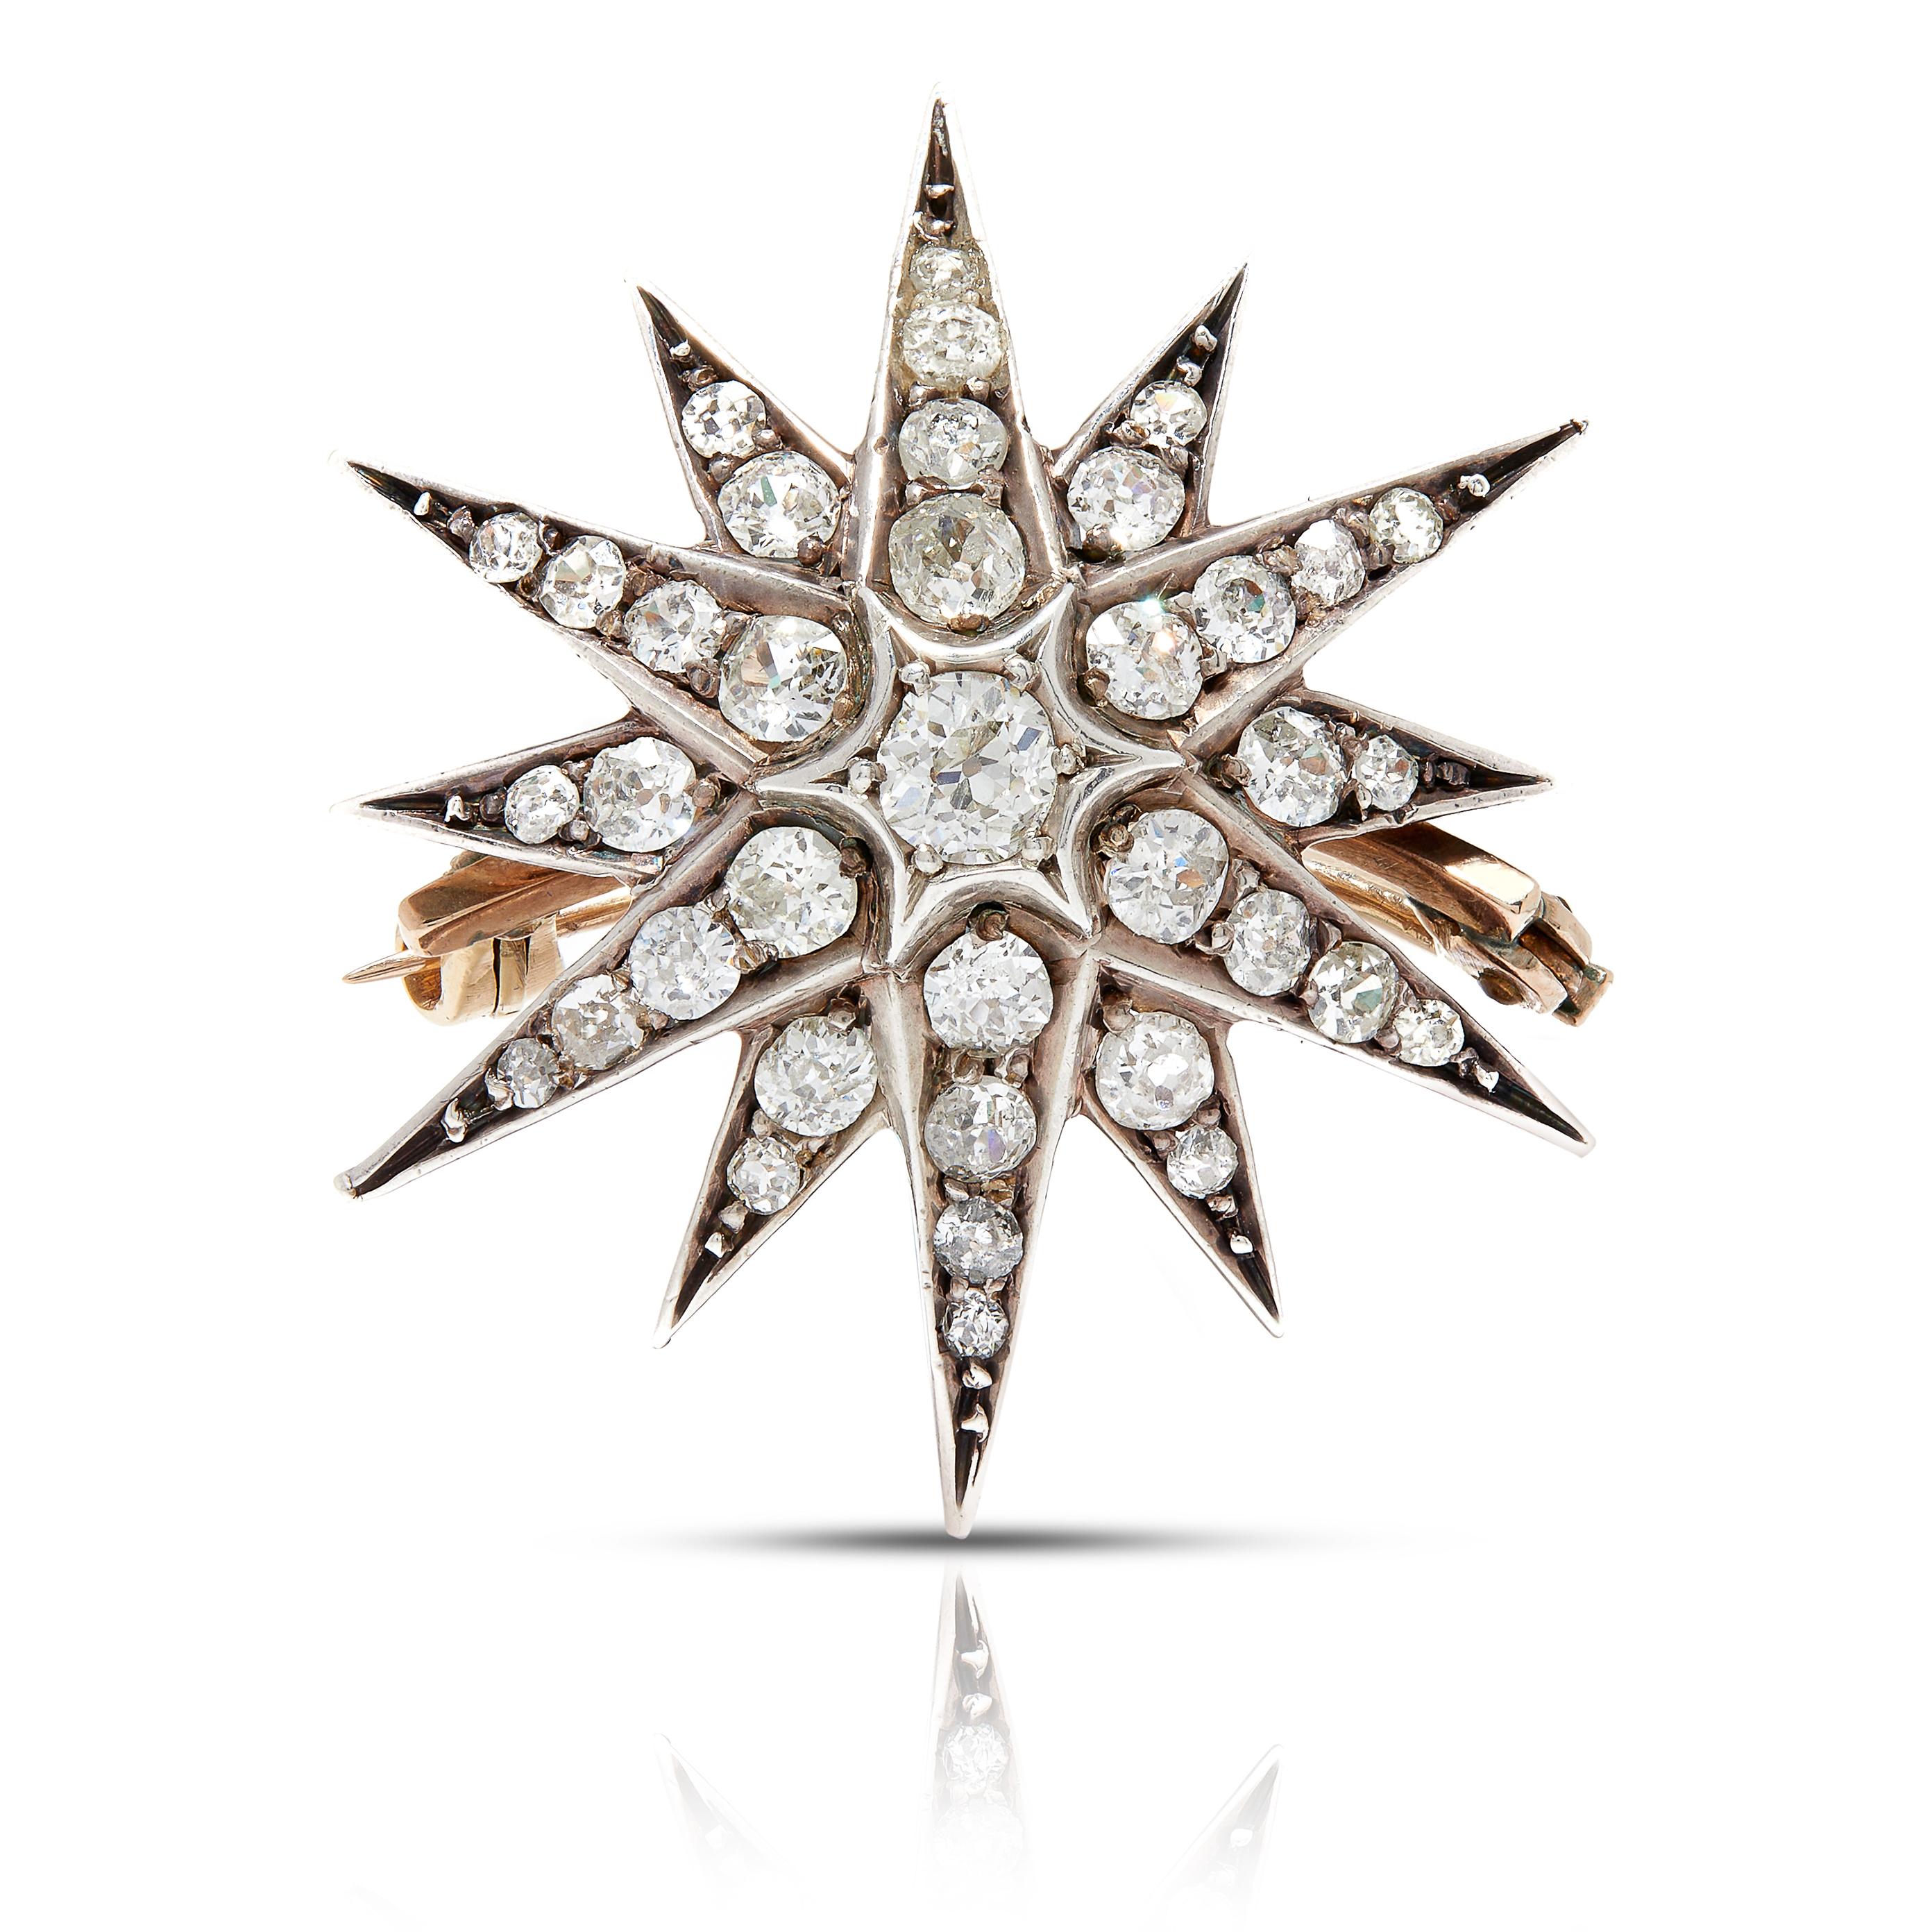 This magnificent late-Victorian diamond brooch in starburst motif will brighten up the sky with an explosive blast of celestial light. The twelve rays are expertly handcrafted in darkened silver over 18ct gold and radiate with just over a carat of